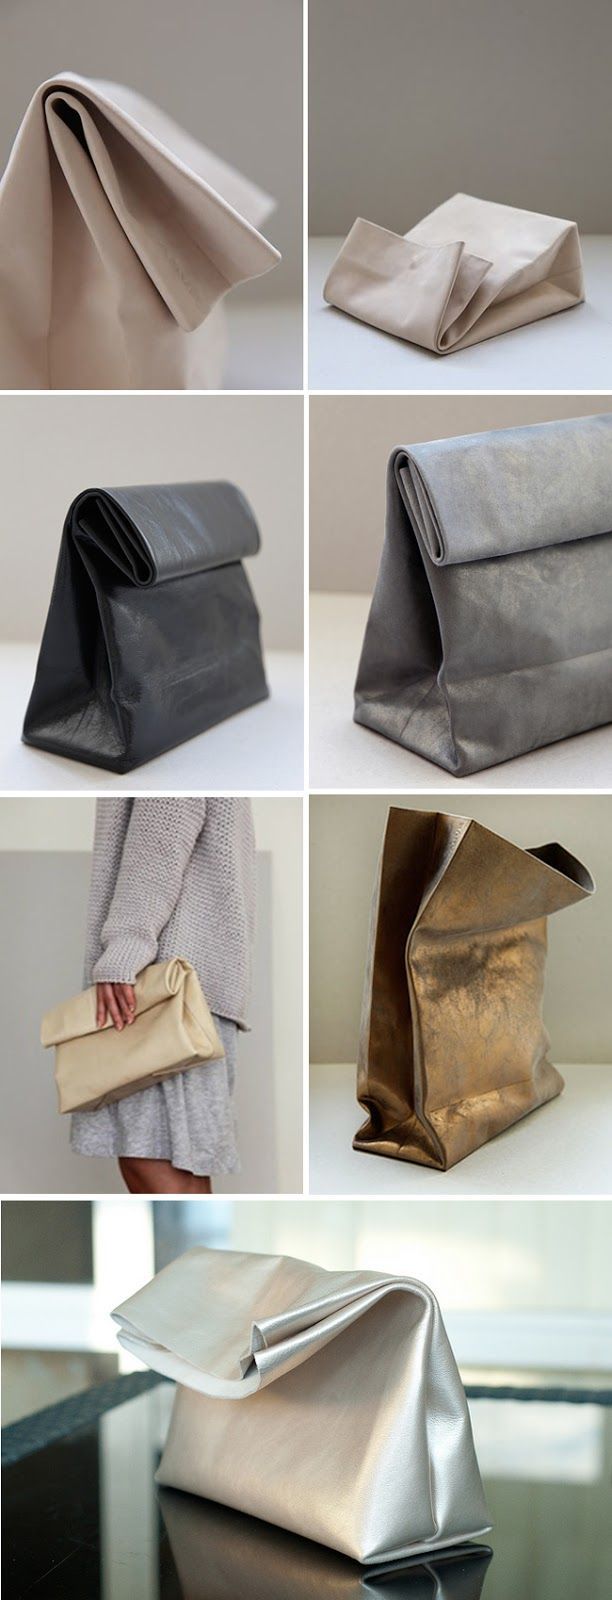 DIY paper bag like clutch. Unfortunately it only links to the blog, but it would be easy enough to figure out